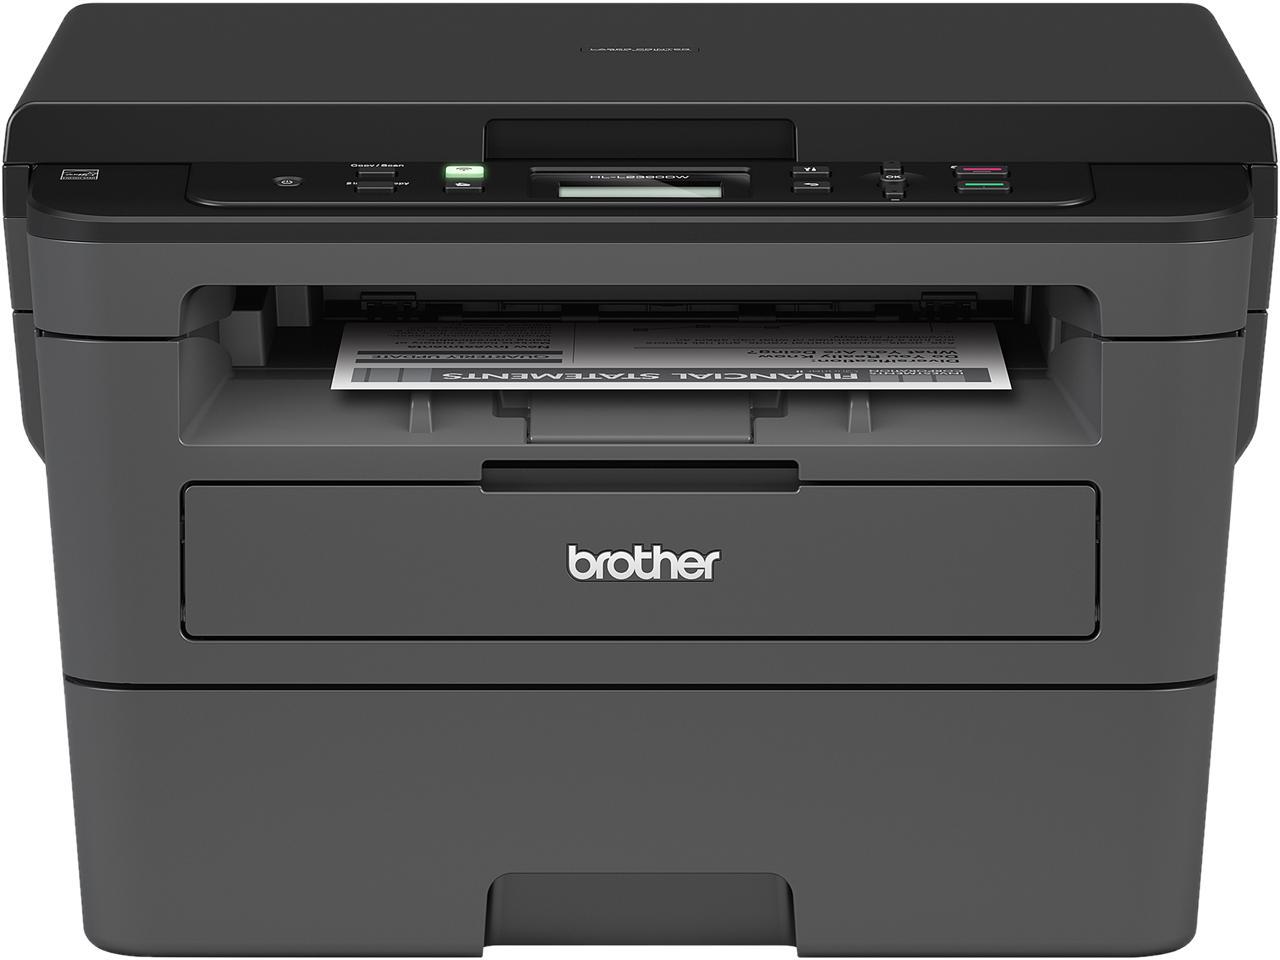 brother hl l2380dw printer how to add laser